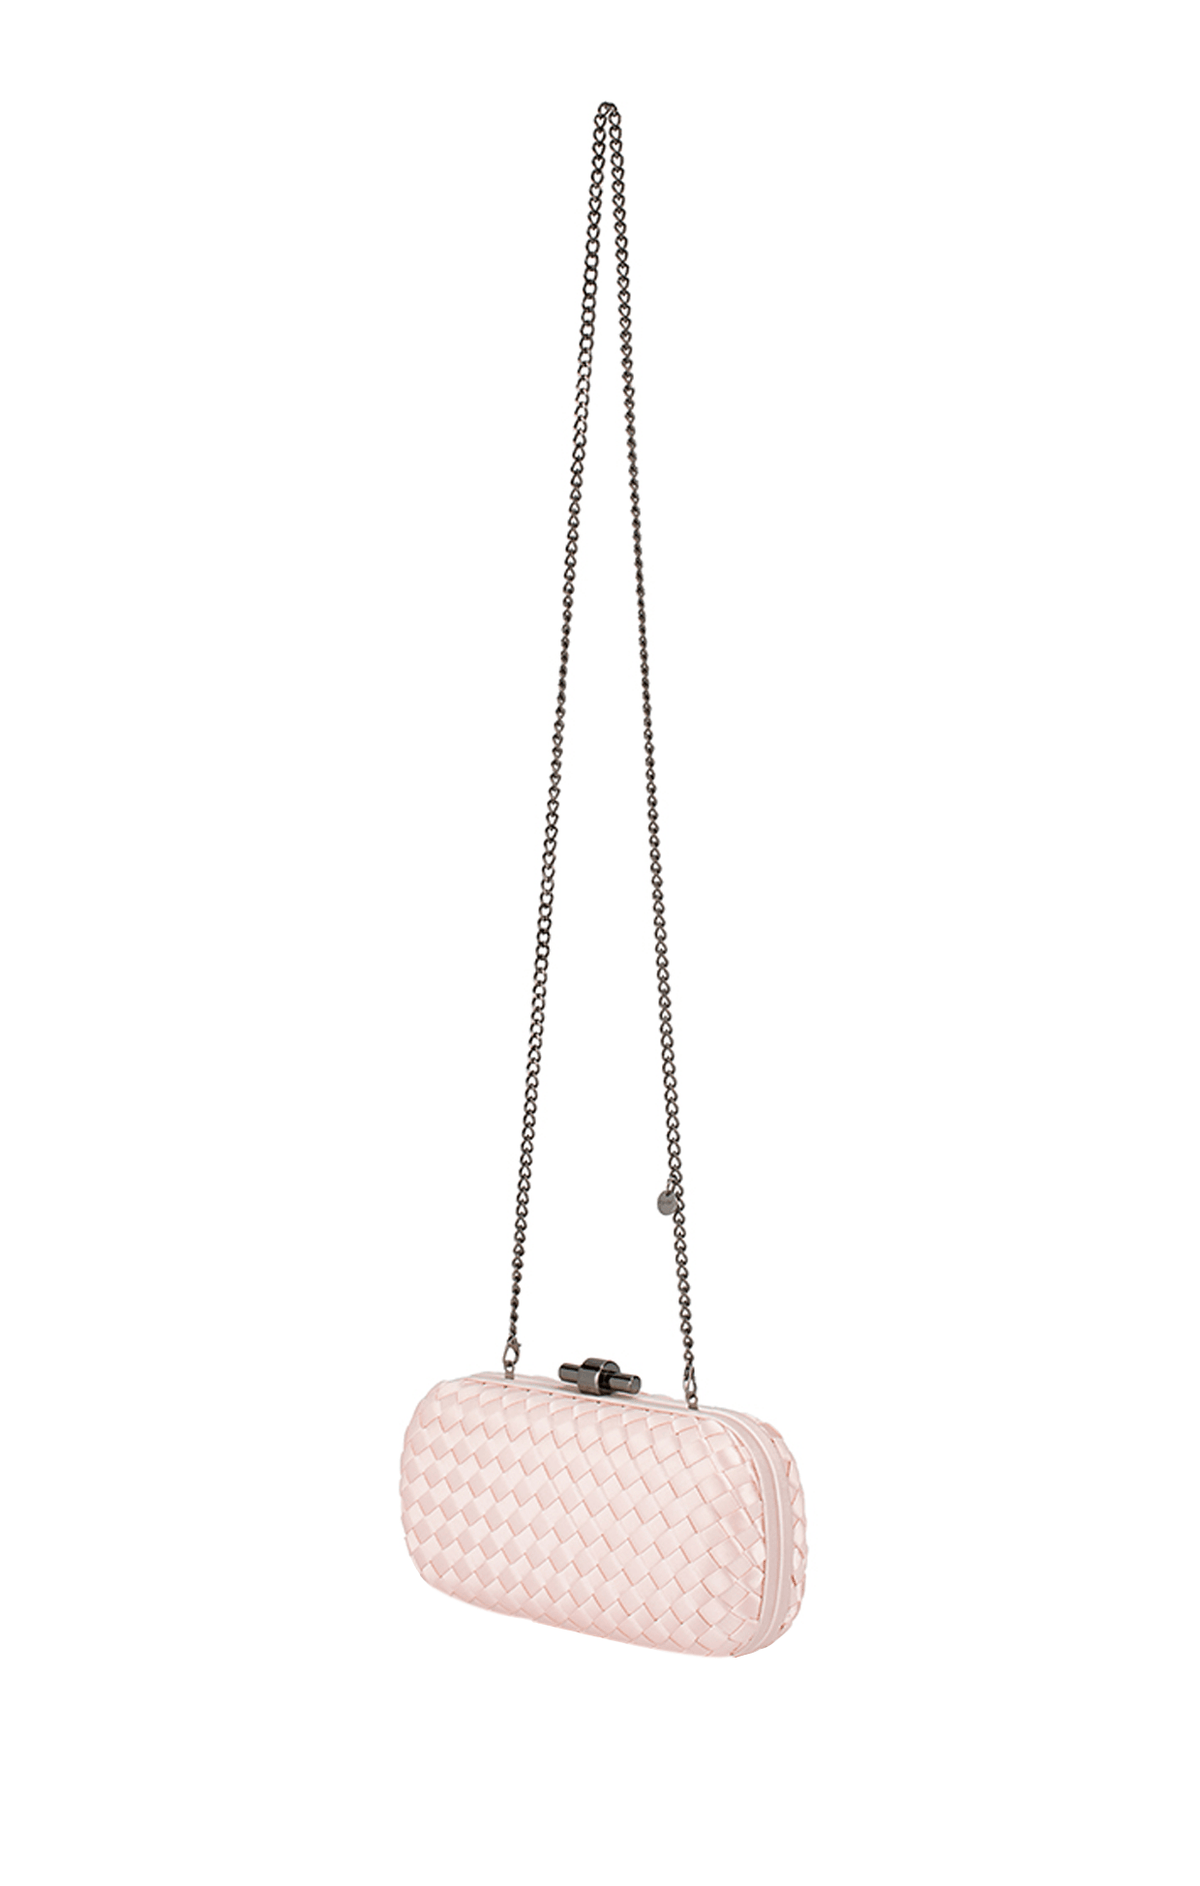 Bags OS / BLUSH EVELYN WOVEN CLUTCH IN BLUSH